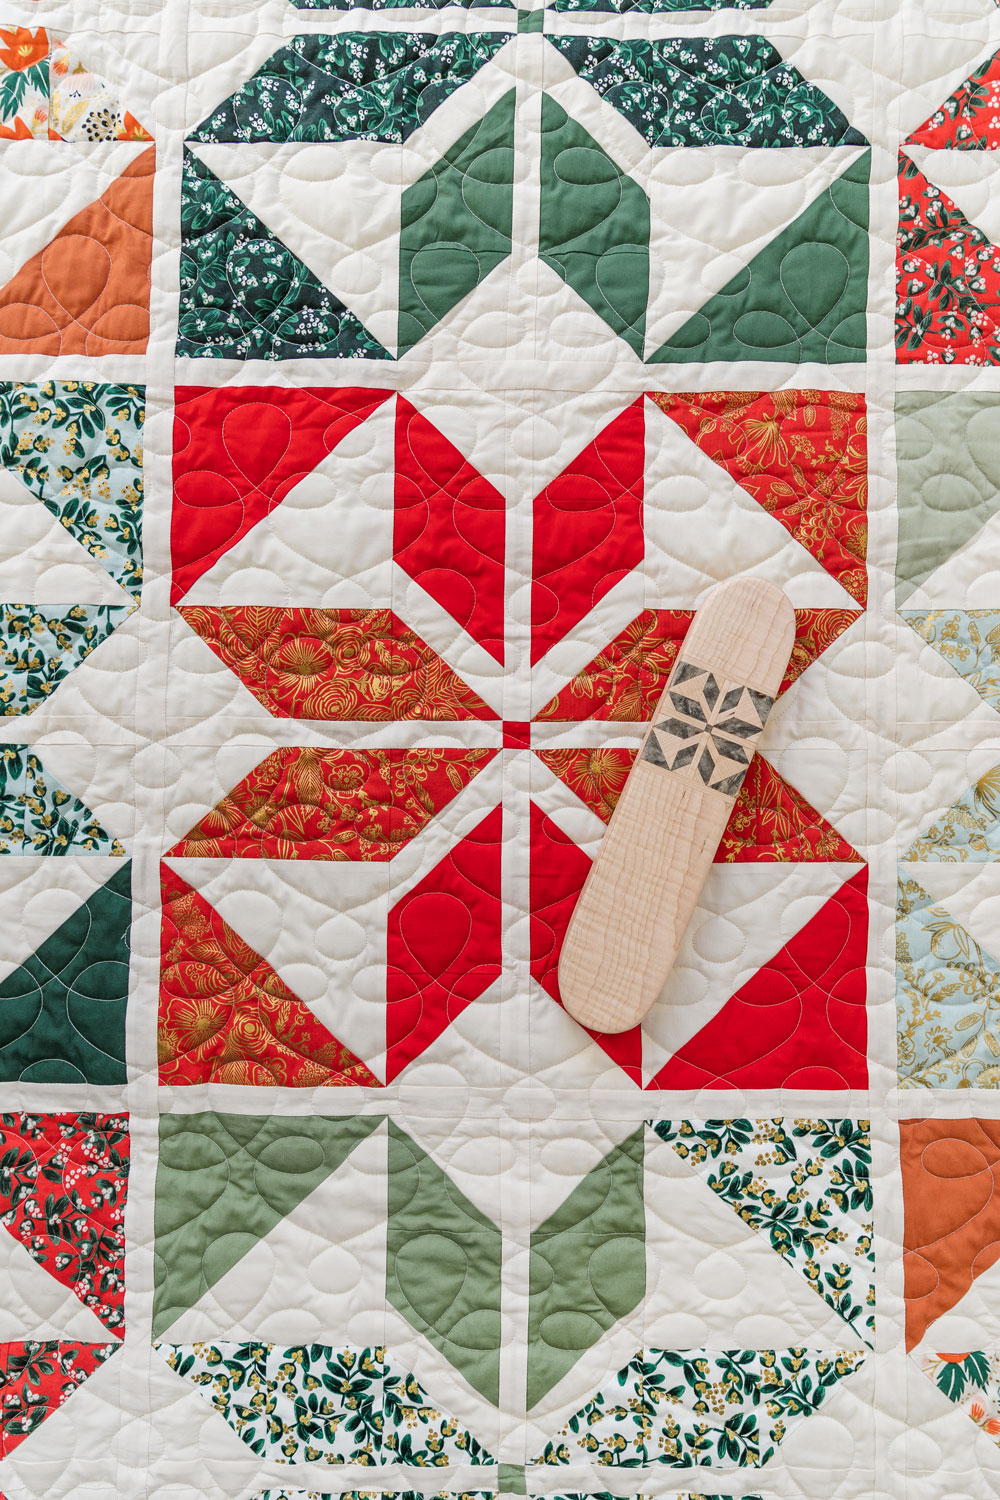 From December 1-12 we are celebrating the holiday season with 12 days of giveaways on Instagram! Follow along with @suzyquilts.